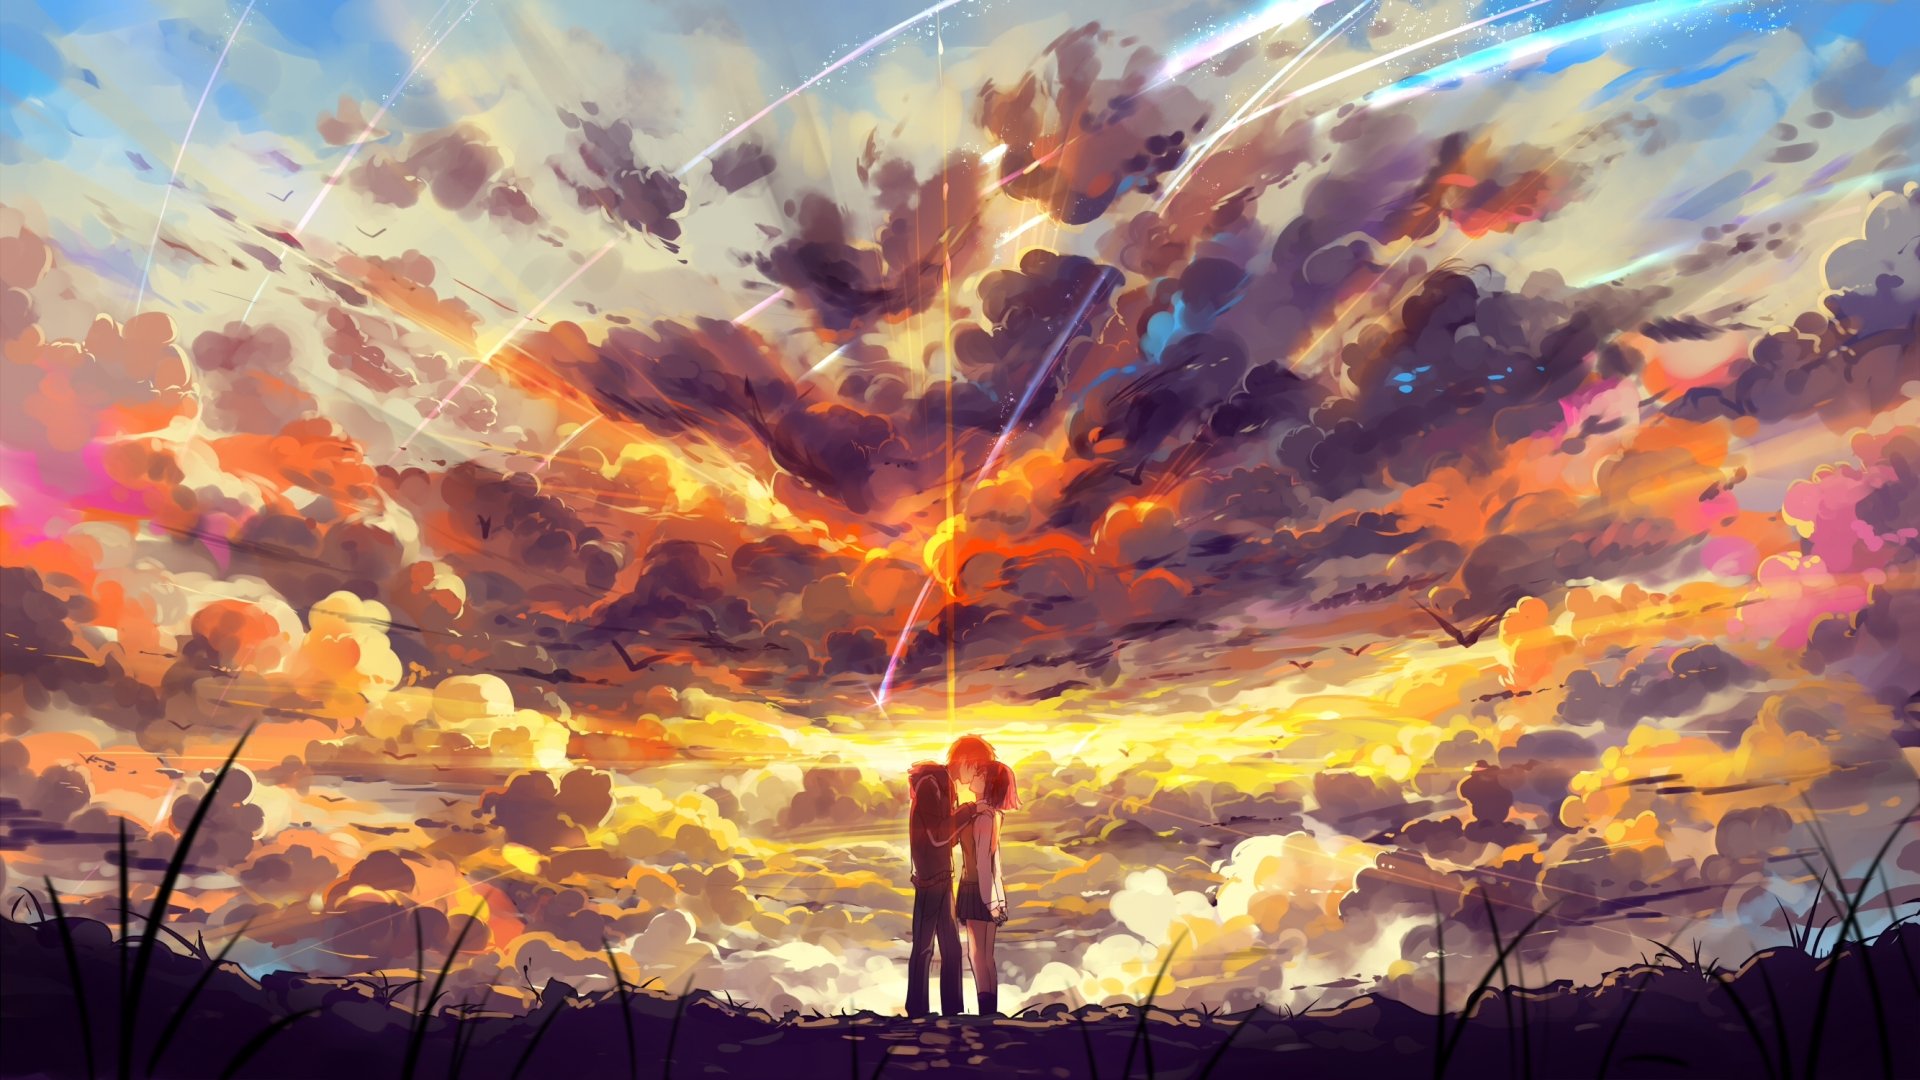  Your  Name  HD Wallpaper  Background  Image 2667x1500 